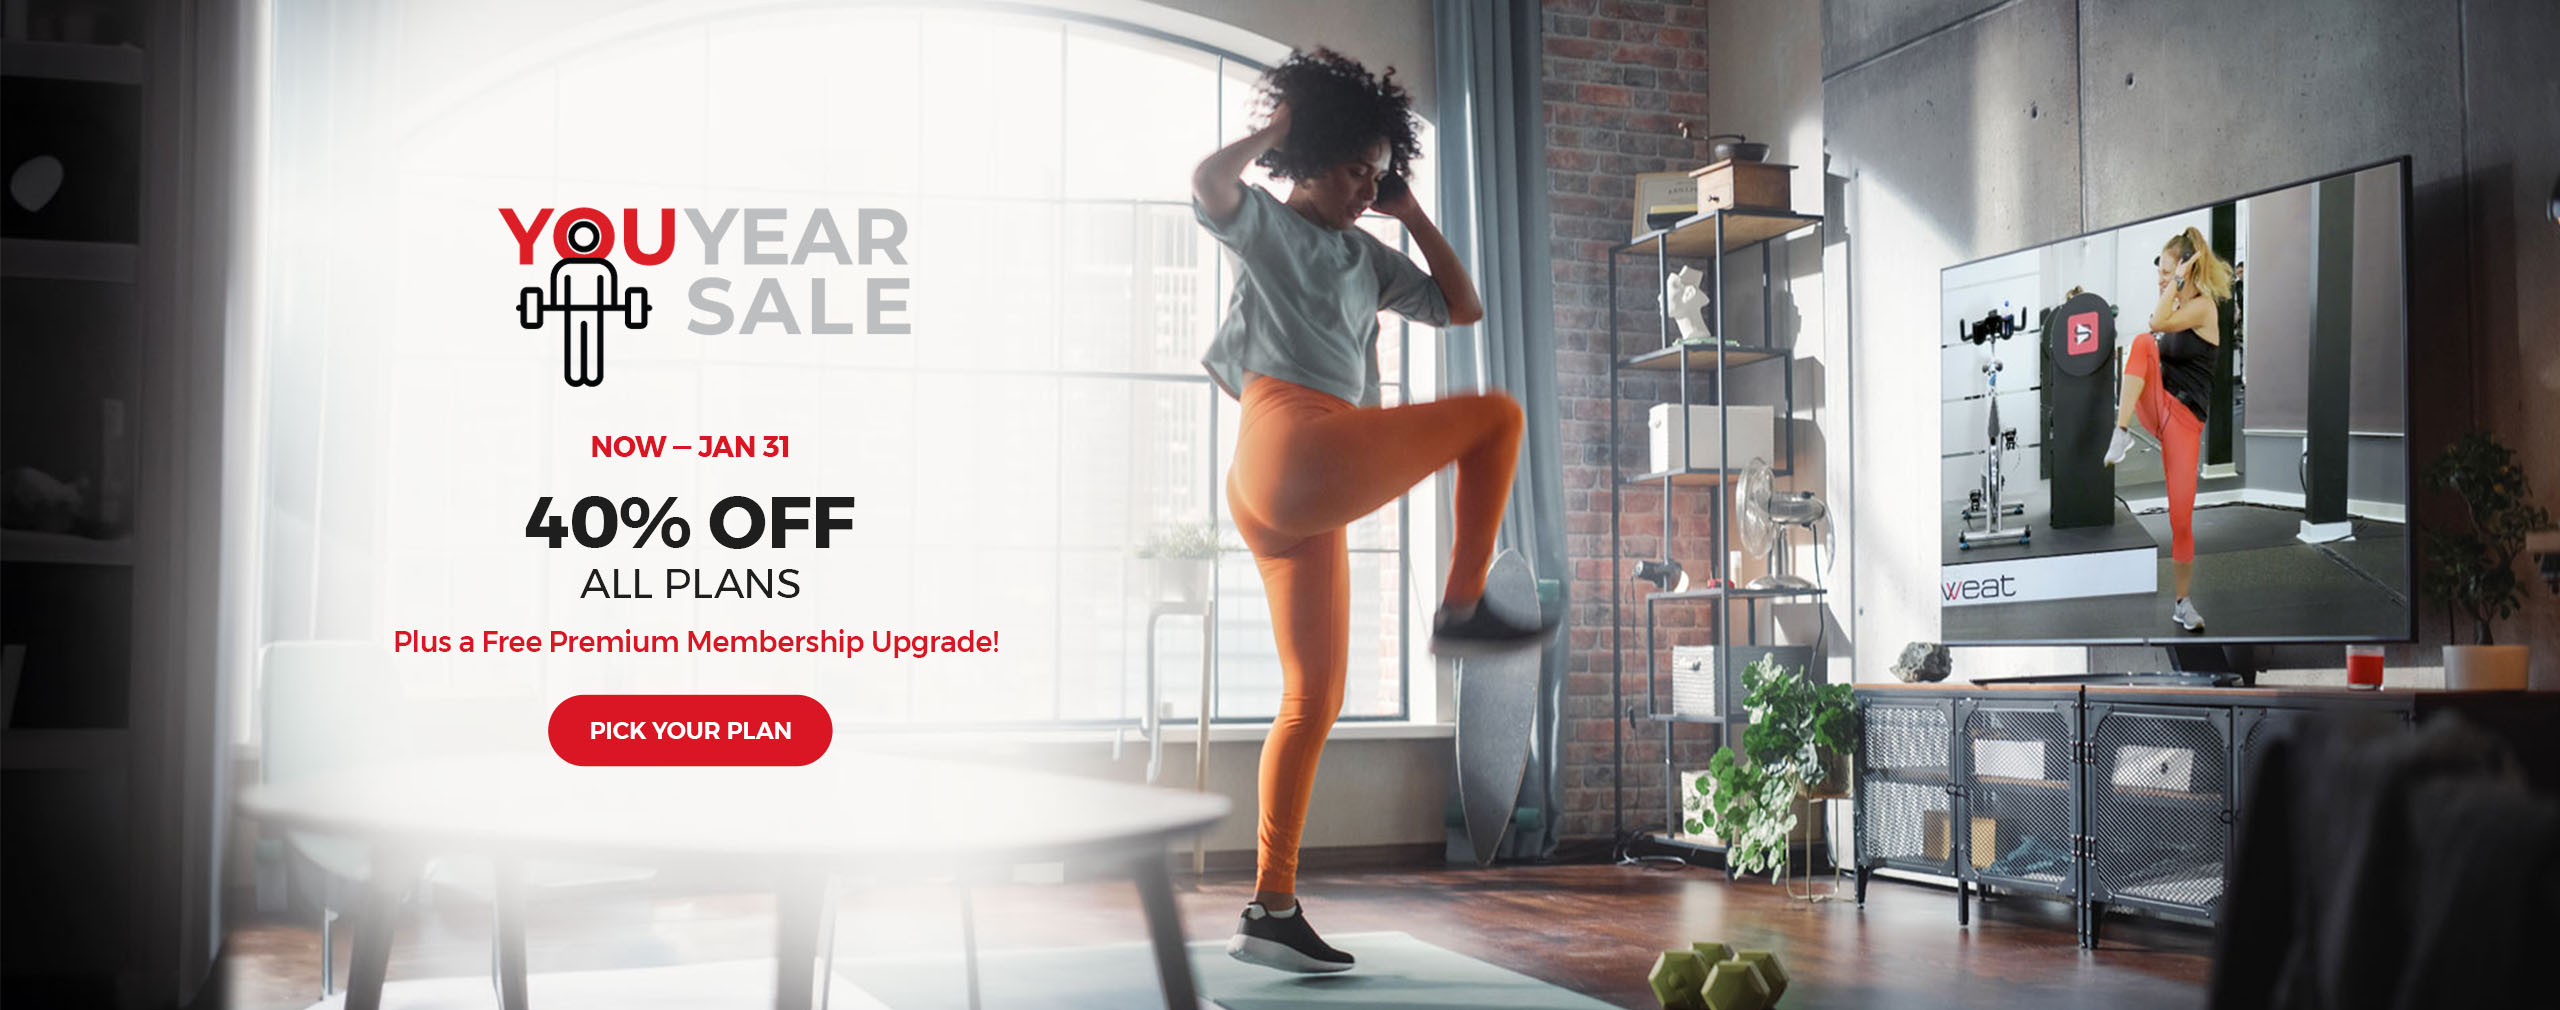 Shop Our YOU YEAR SALE SUPER SALE and Get Unlimited Access to Studio SWEAT onDemand Indoor Cycling and Training workouts from home!